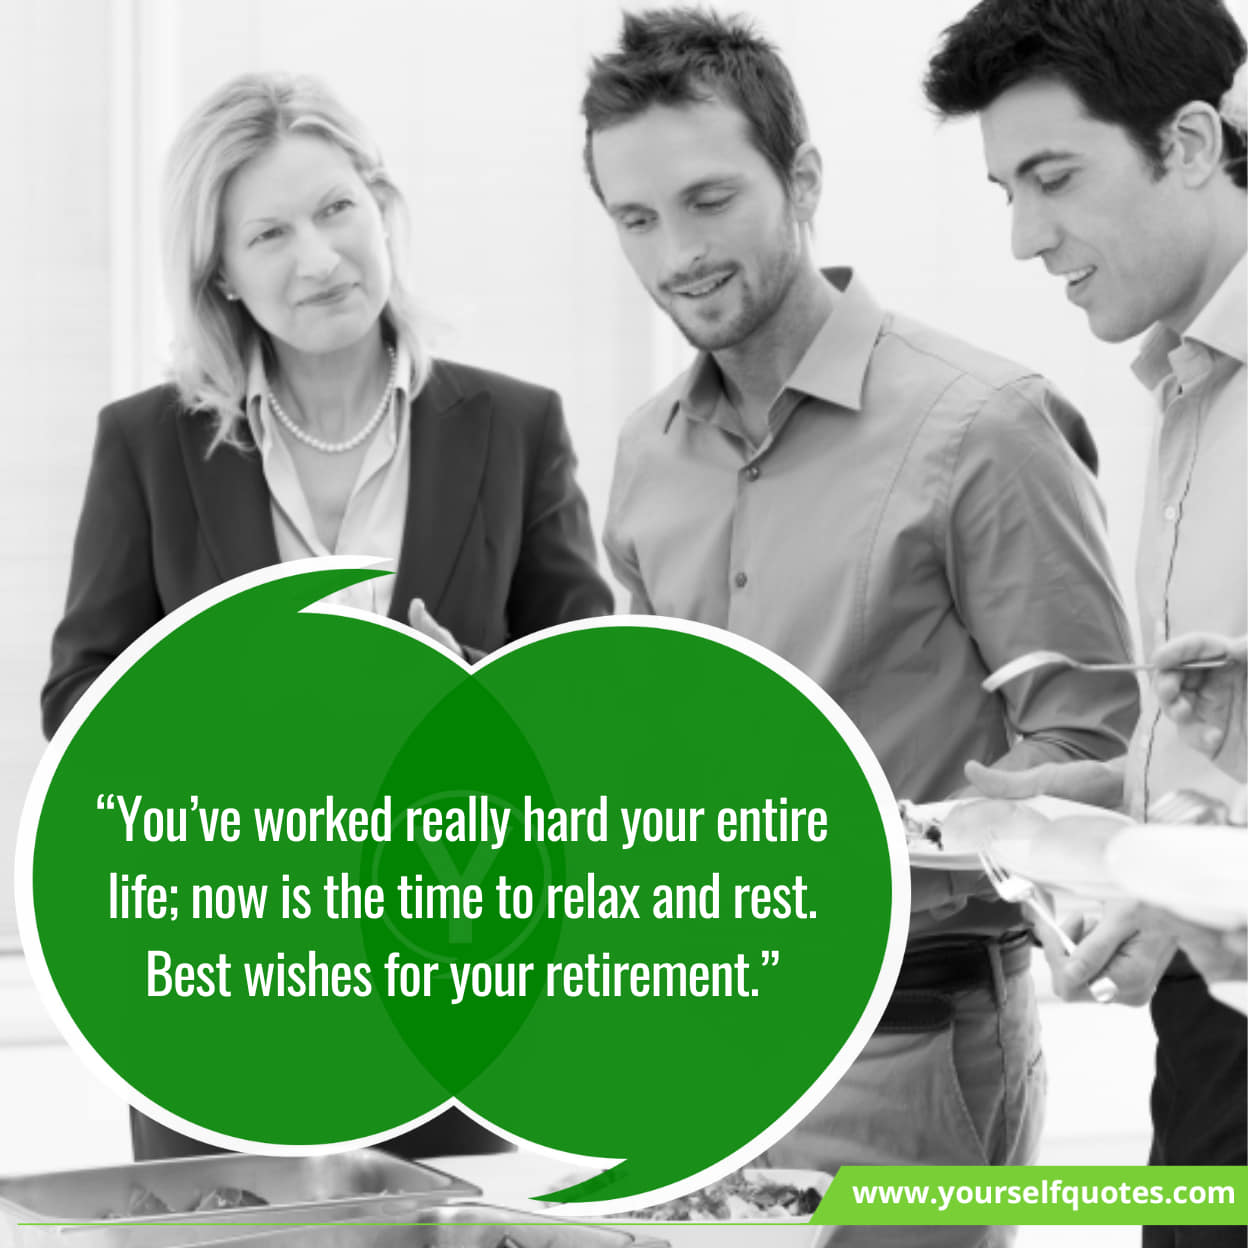 Best Appreciable Retirement Wishes For Co-Workers